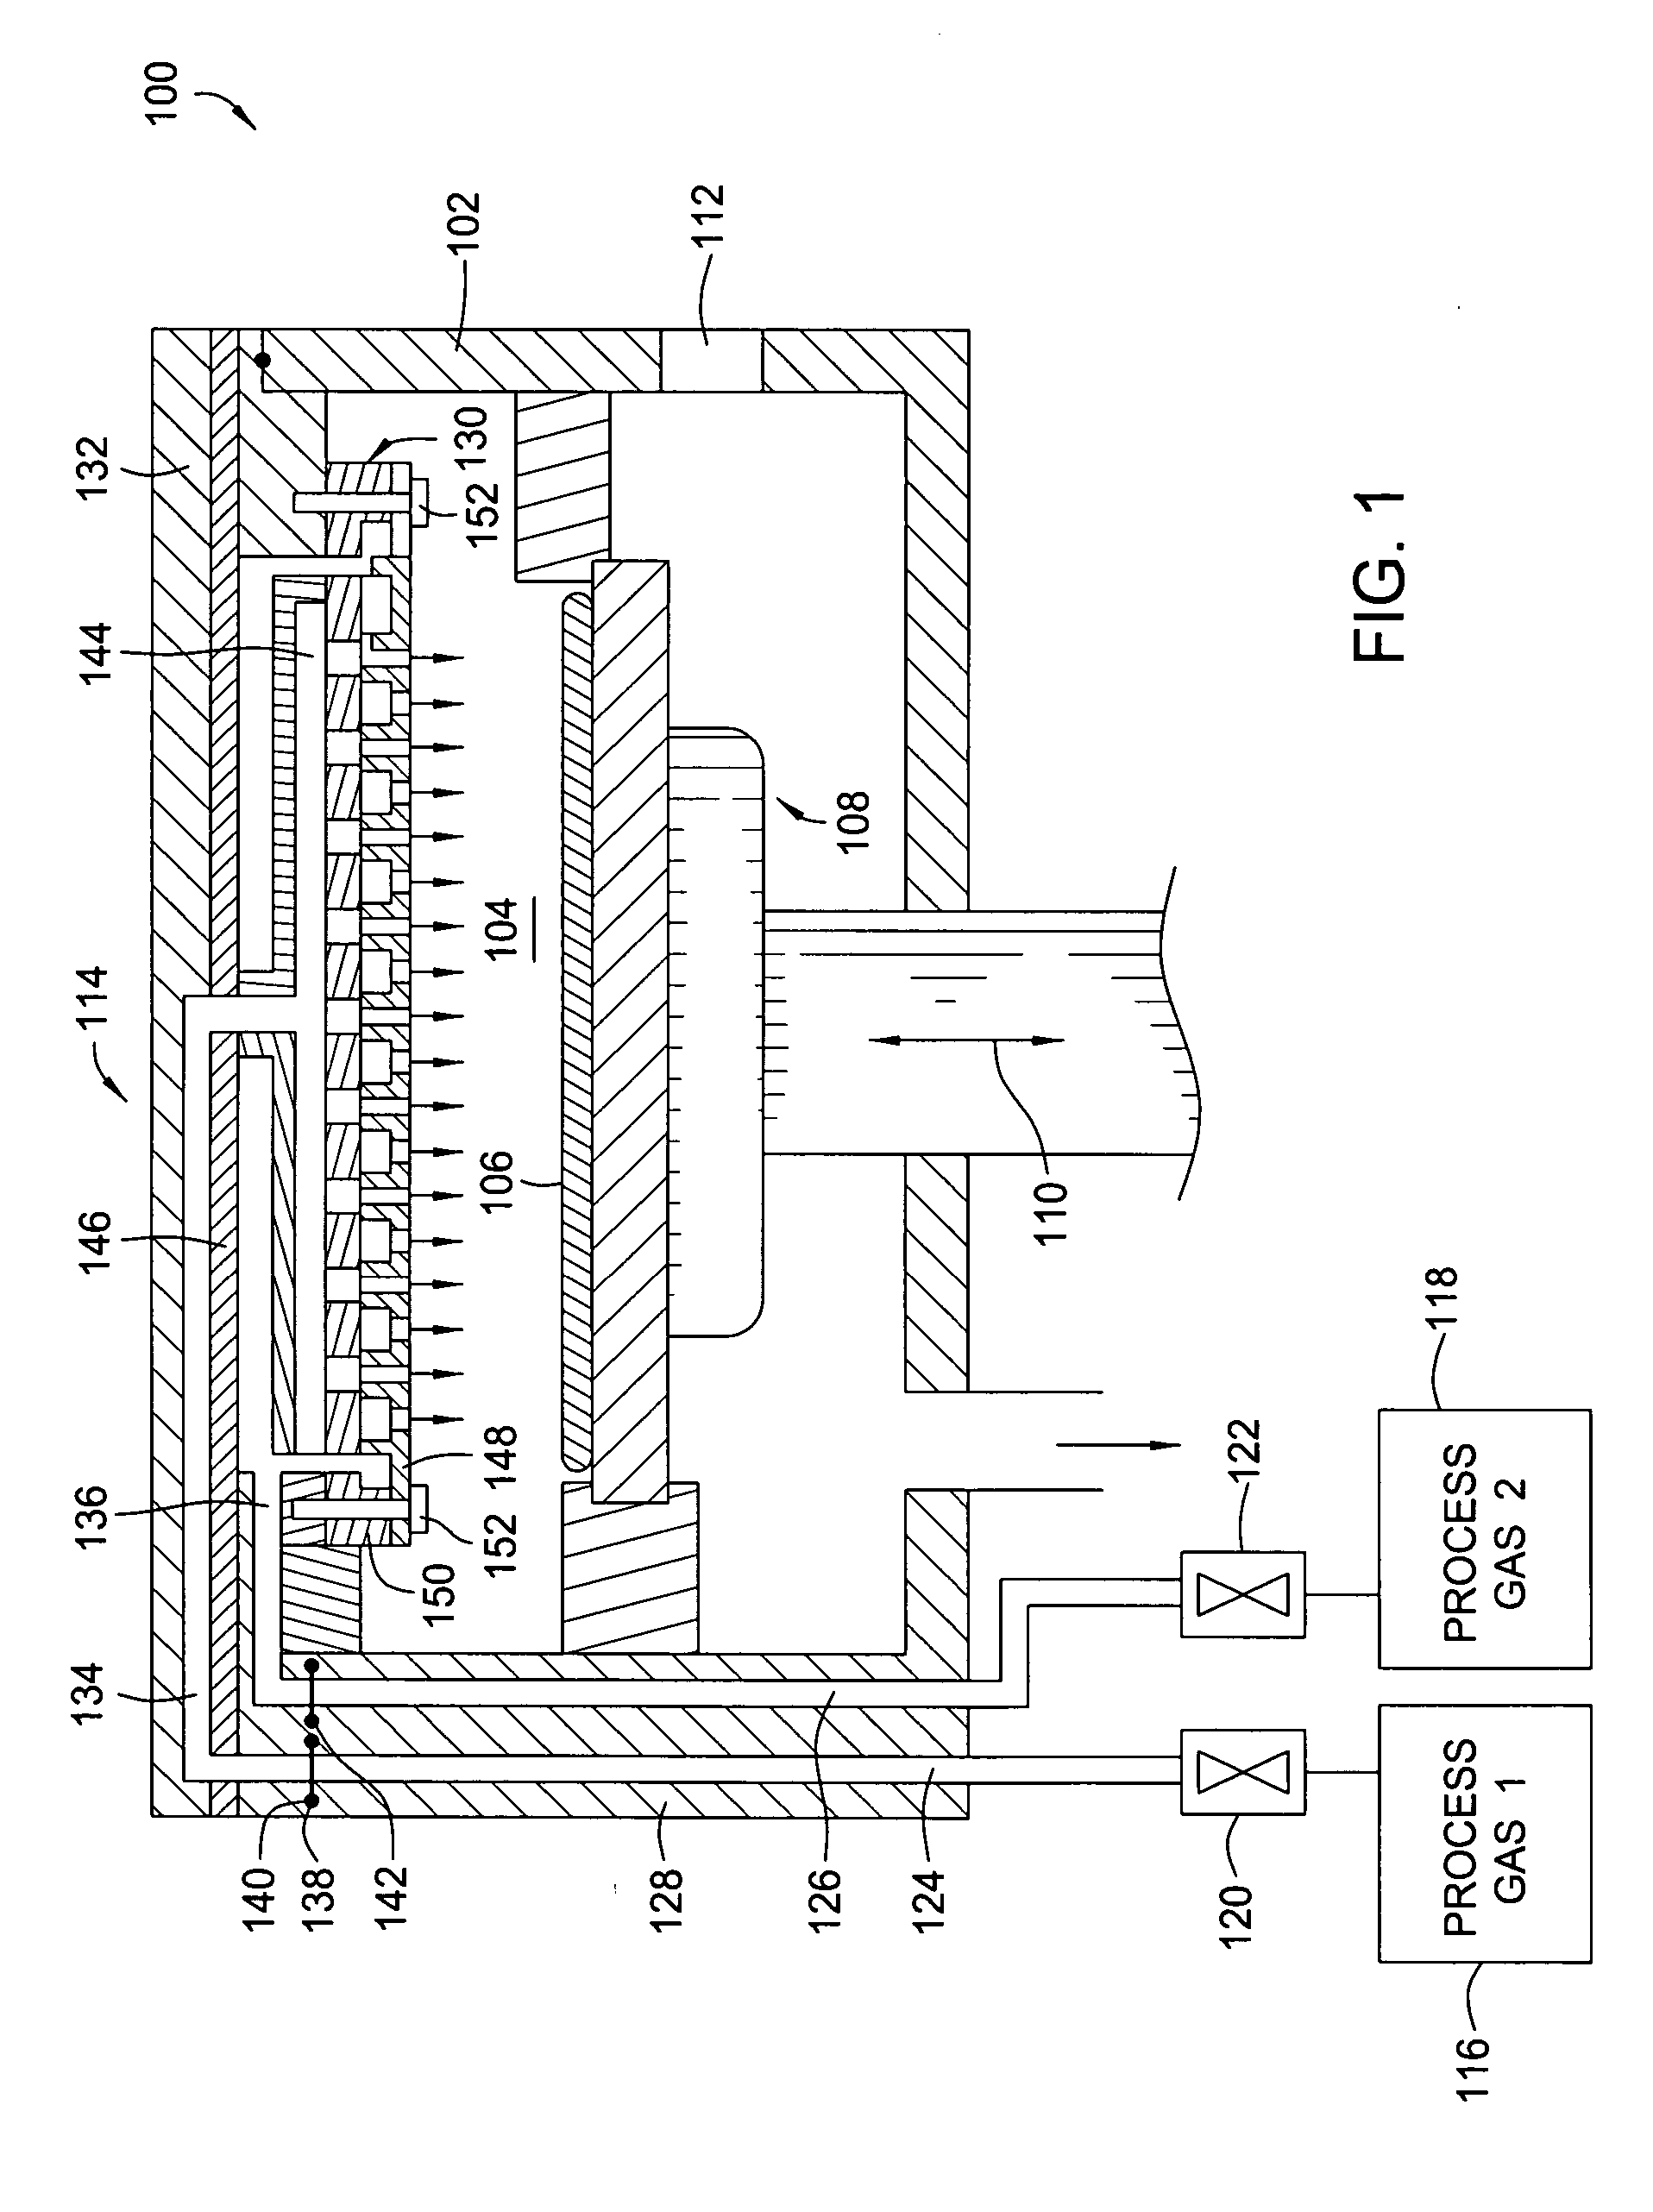 Dual gas faceplate for a showerhead in a semiconductor wafer processing system